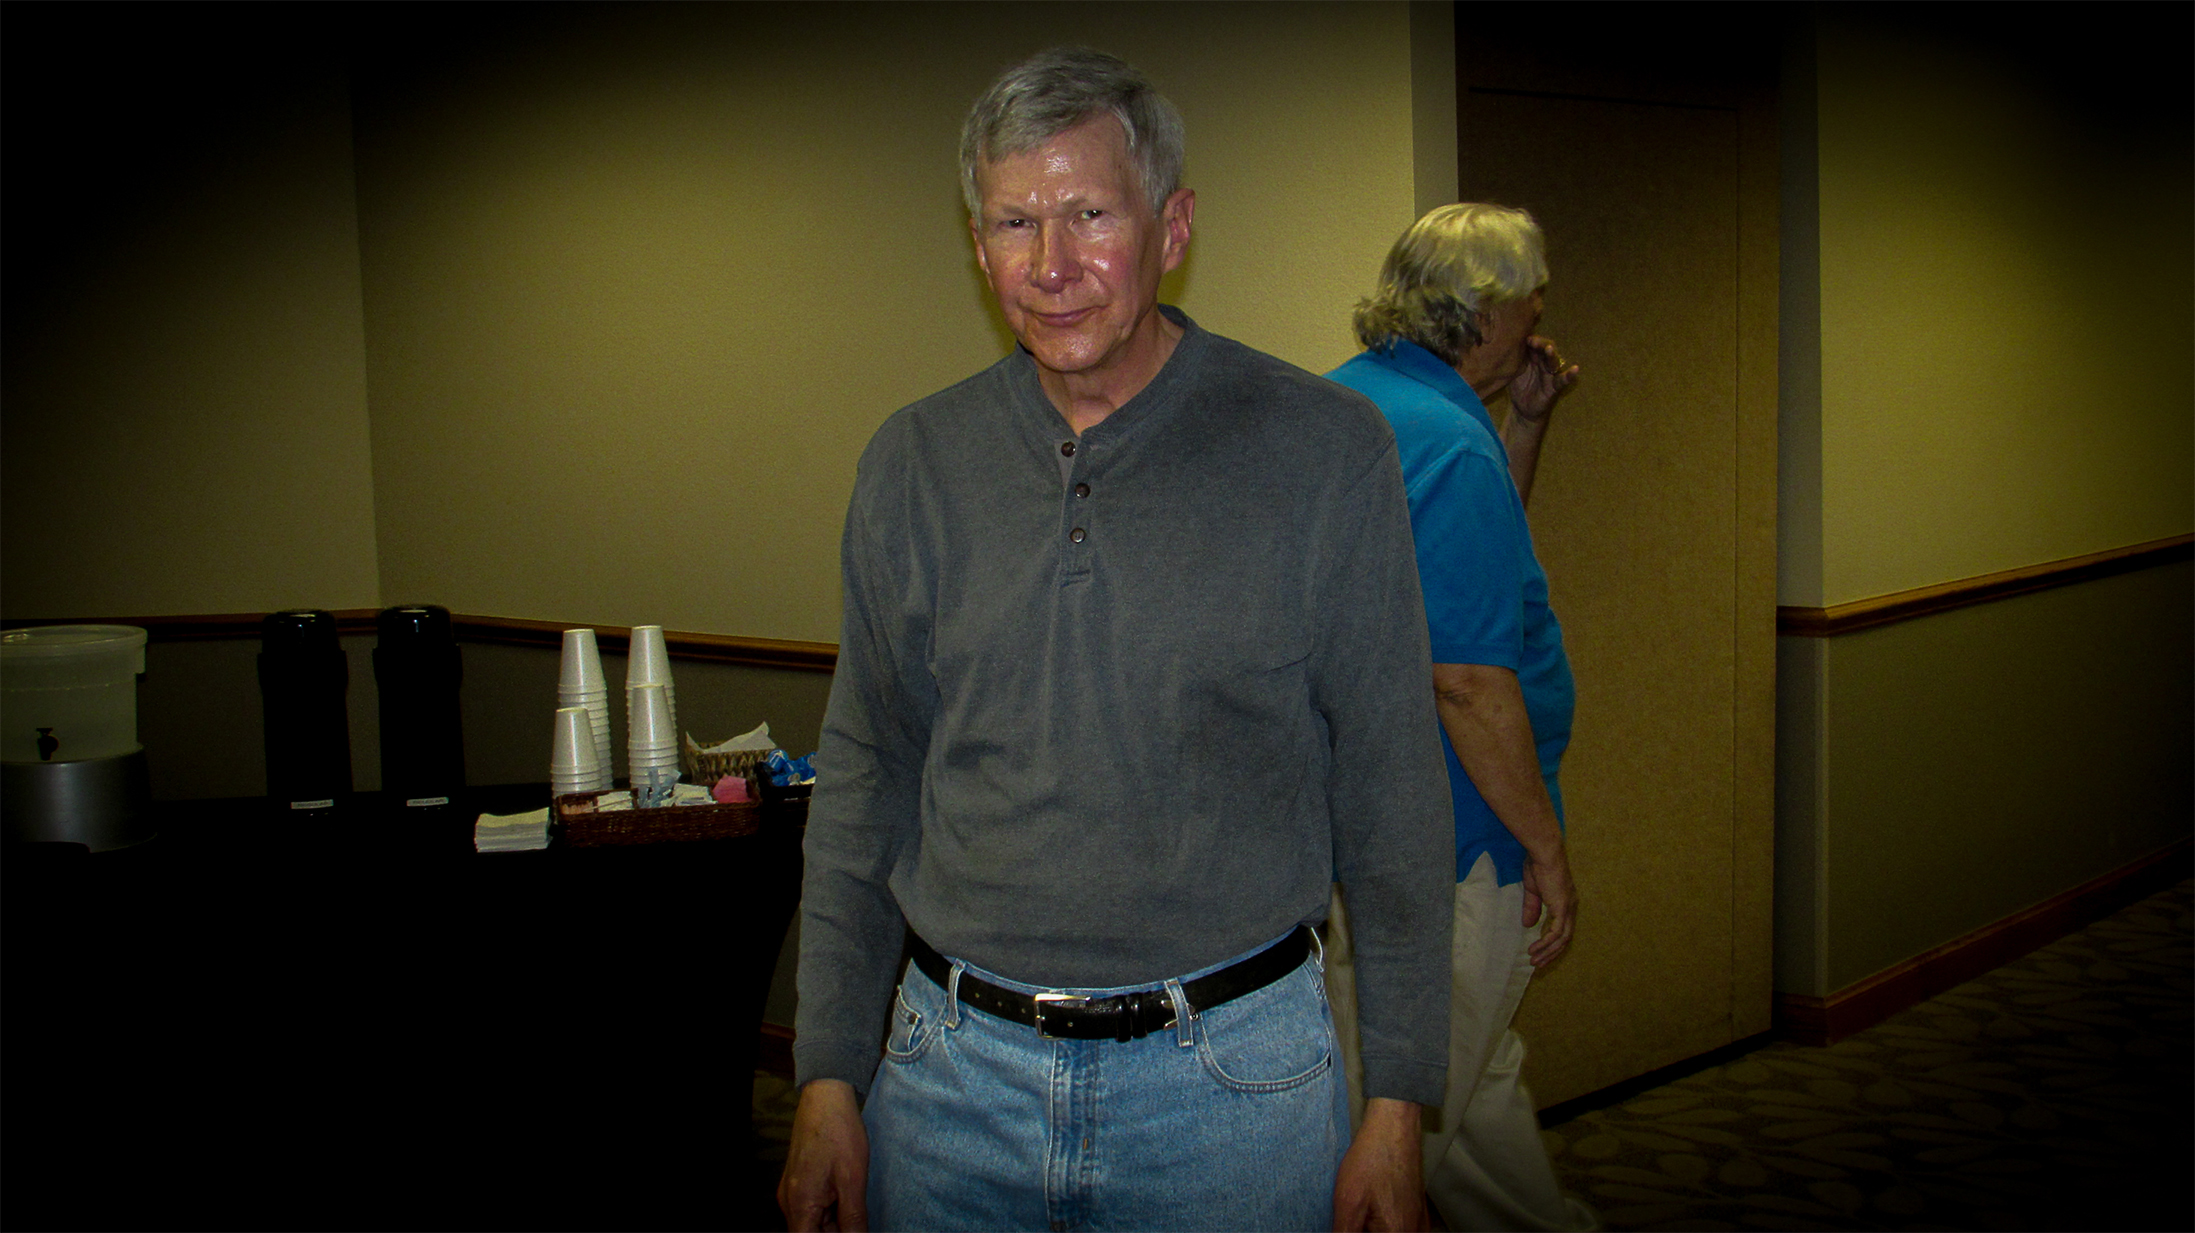 Fort Worth's Jim Kirk is ranked in the 95th Percentile for all USA chess players and in the 97th Percentile for all Texas chess players.  He is also ranked in the 91st Percentile for all Senior chess players.  A US Chess Life Member, this was his second RRSO.  Photo by Mike Tubbs.